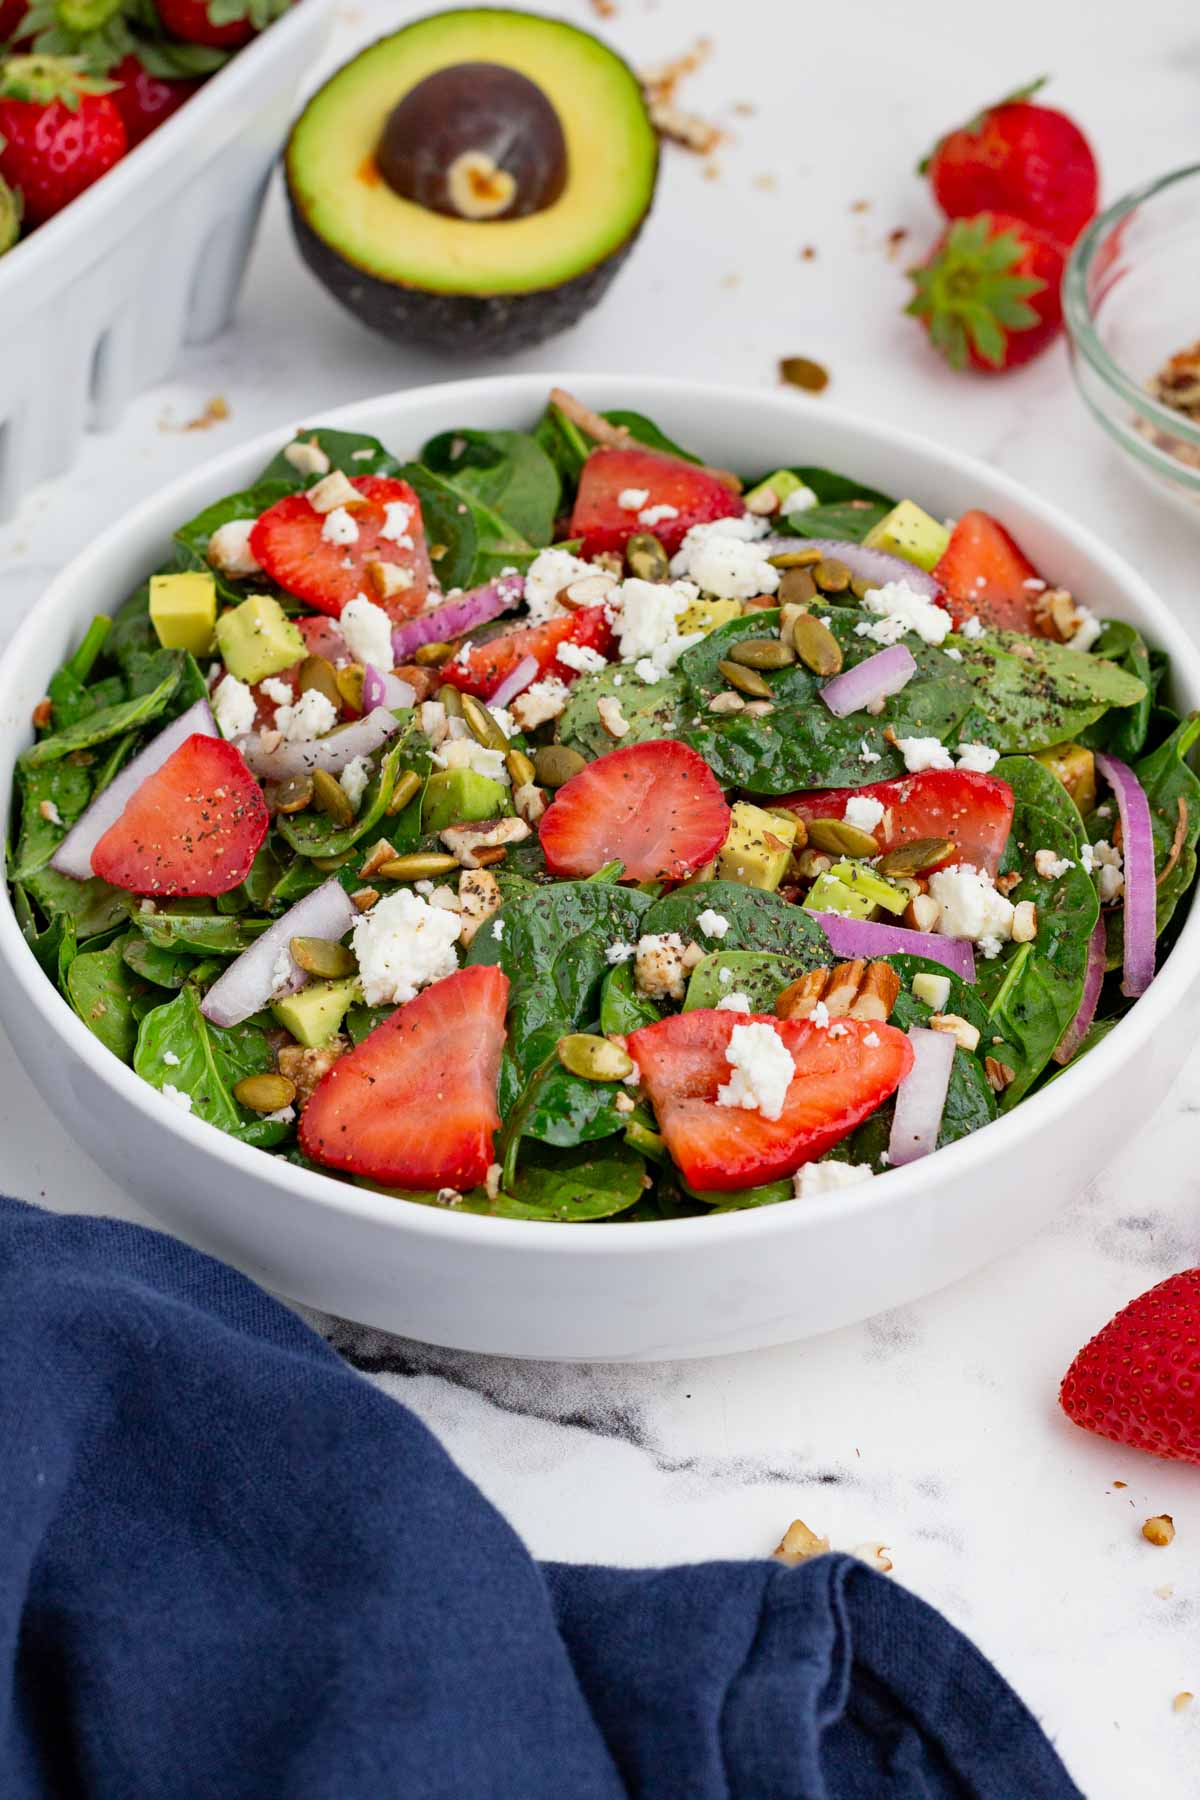 A strawberry spinach salad in a white bowl with an avocado behind it.